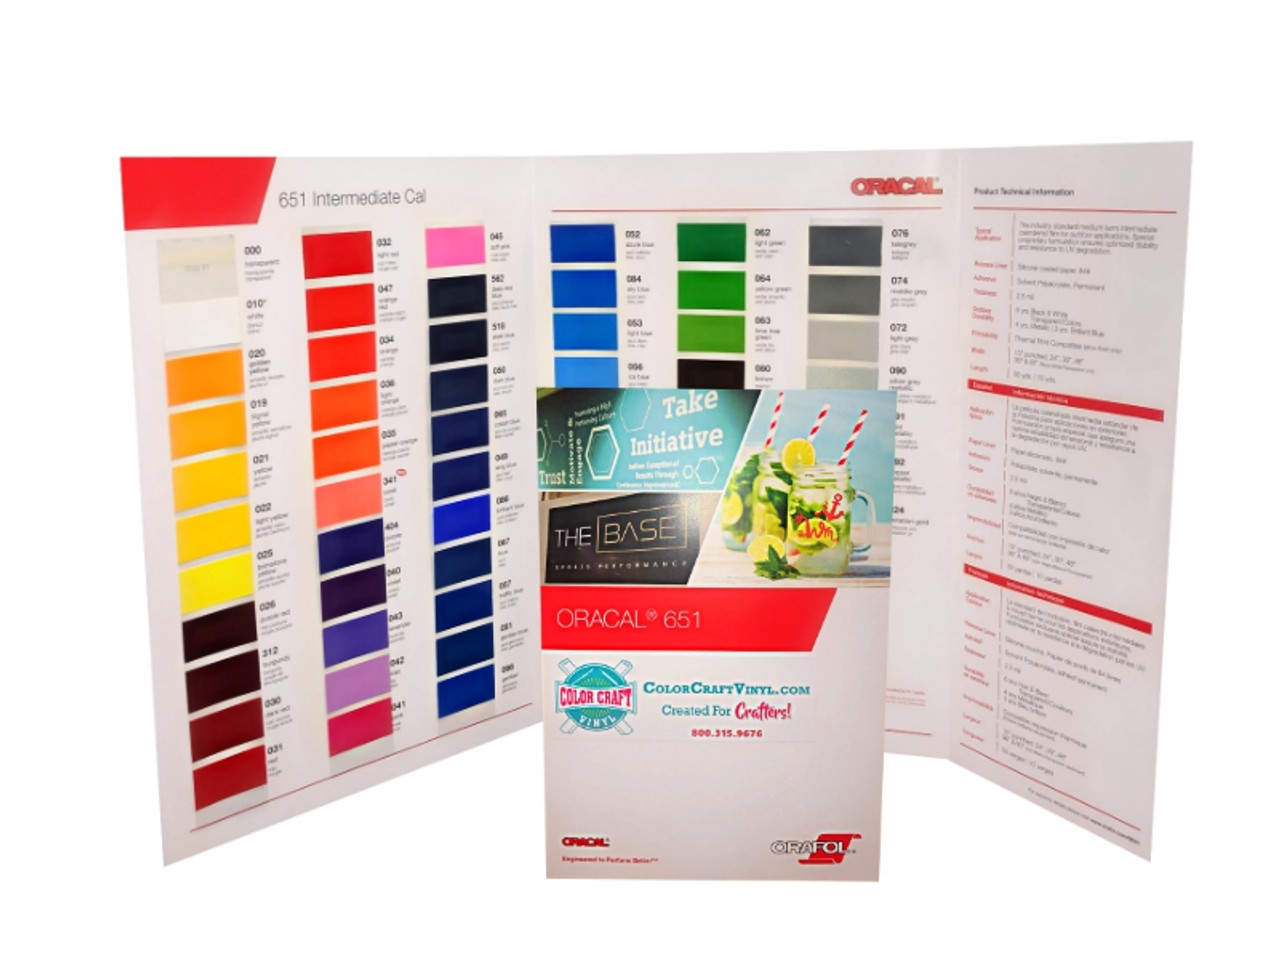 Oracal 631 Exhibition Calendered Film Color Chart